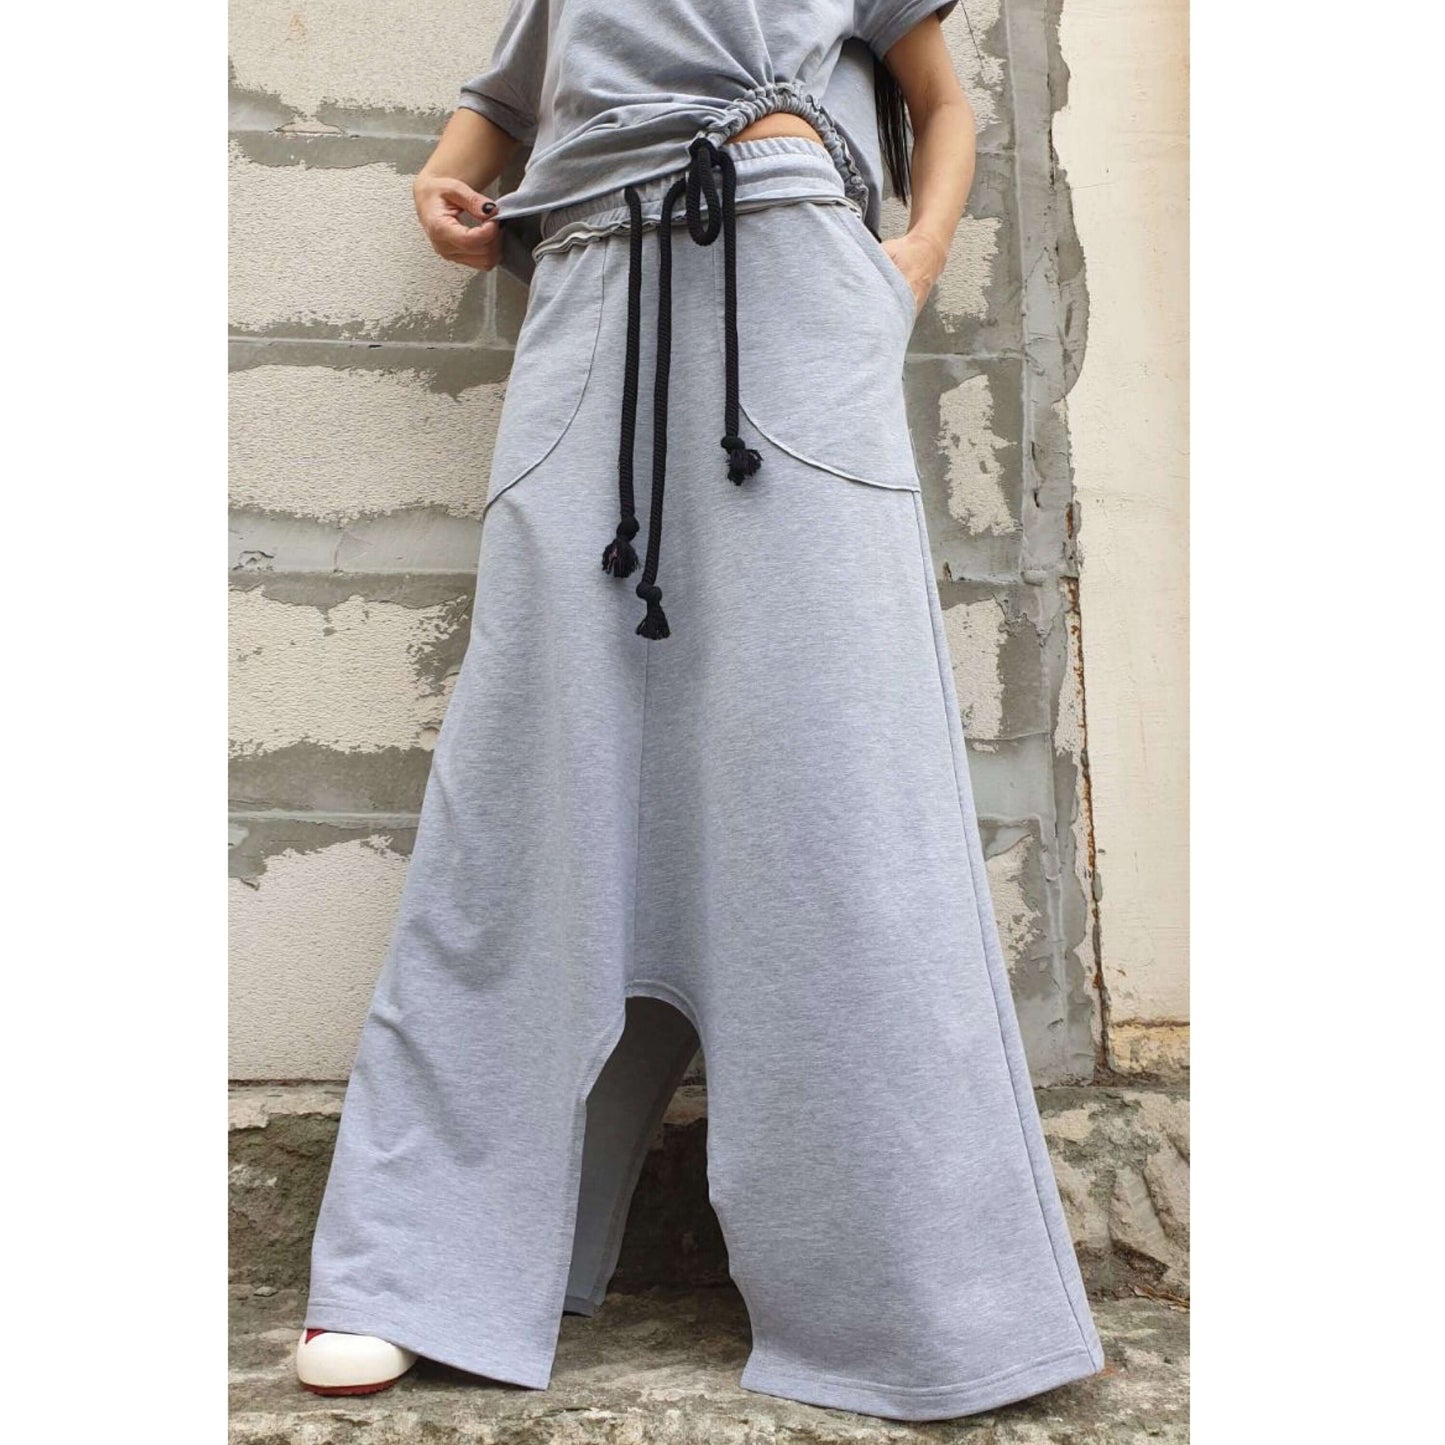 Casual Comfortable Long Cotton Skirt - Handmade clothing from AngelBySilvia - Top Designer Brands 